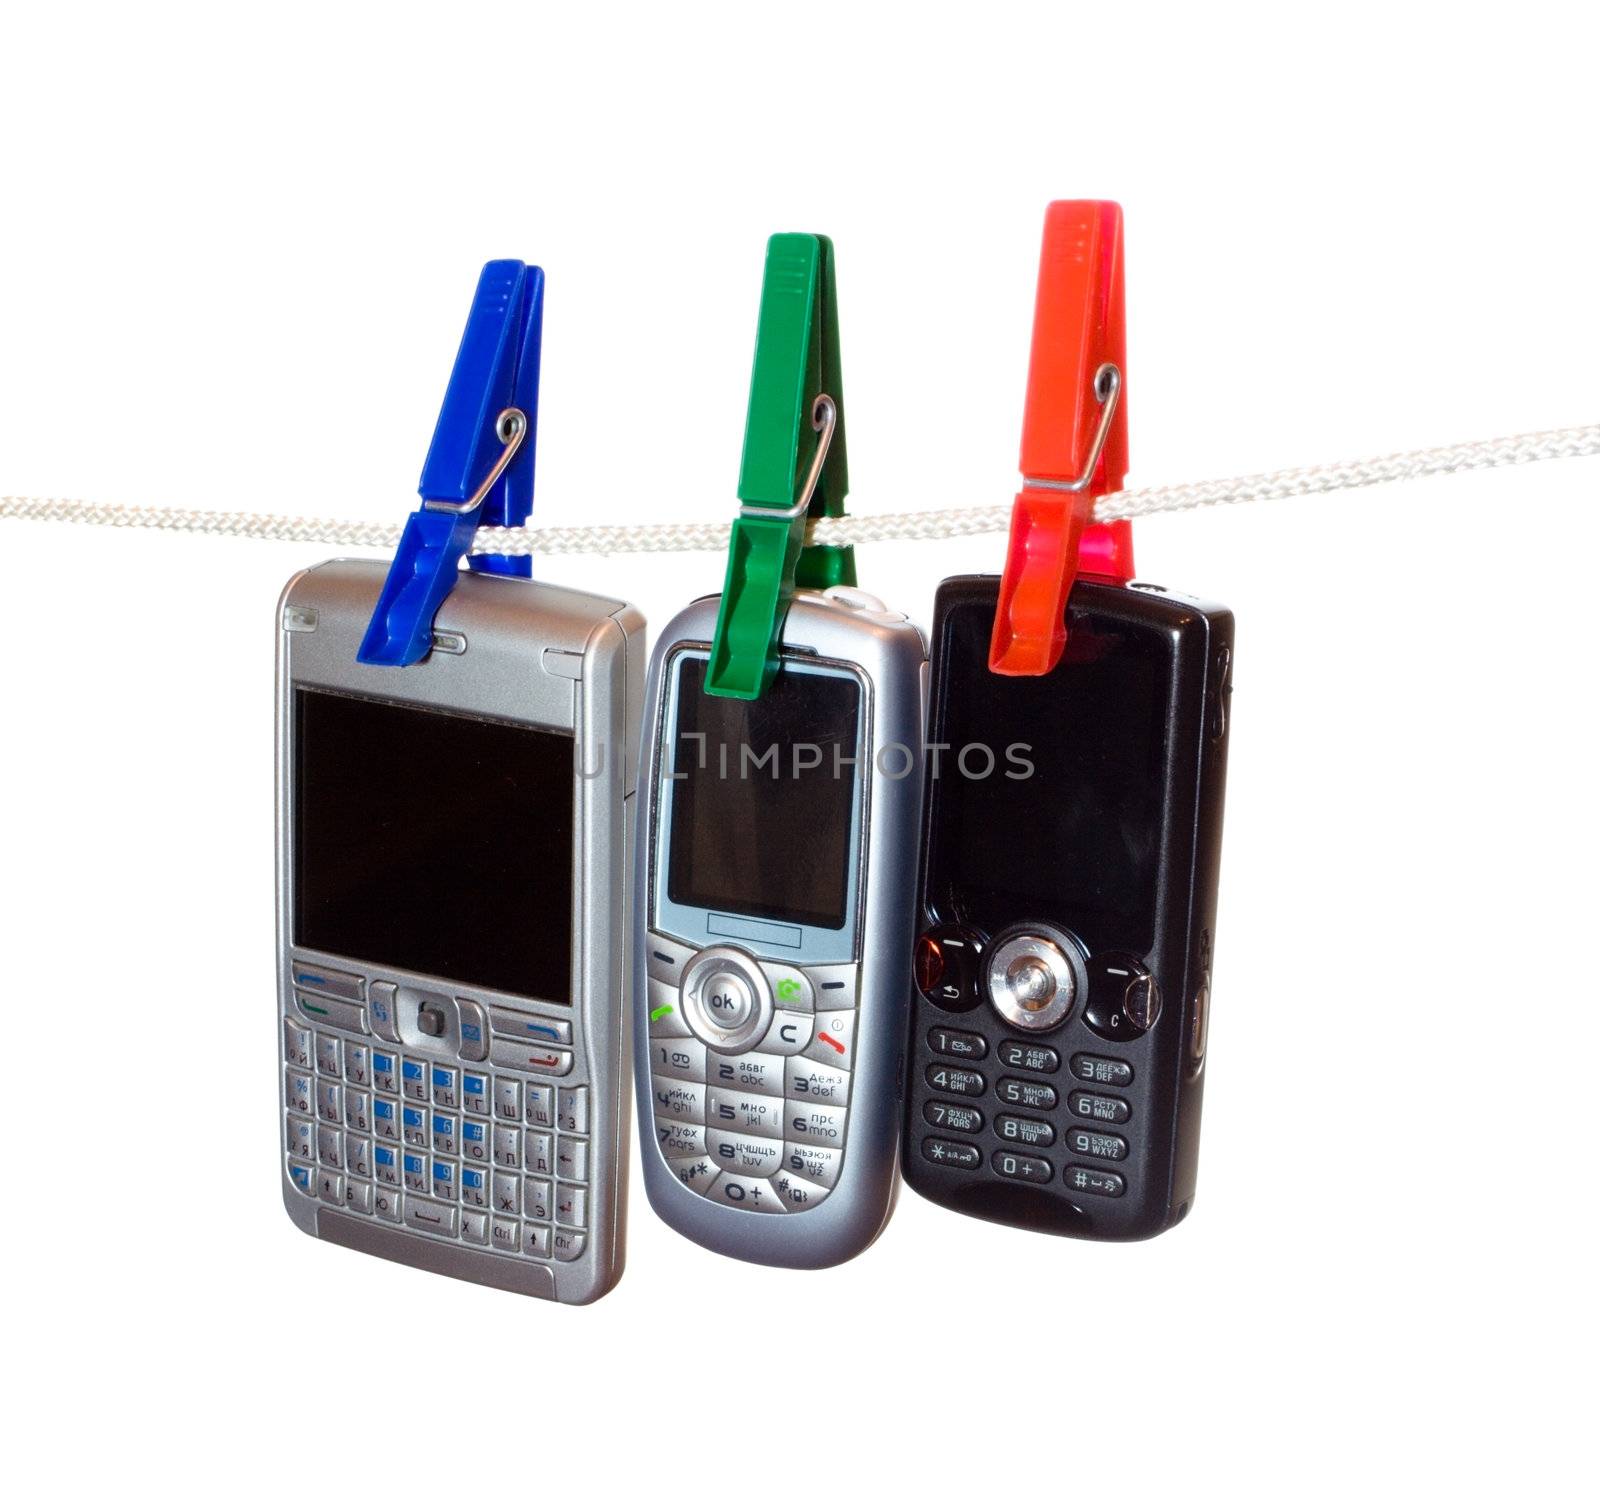 three mobile phones on a clothes line 2 by Alekcey